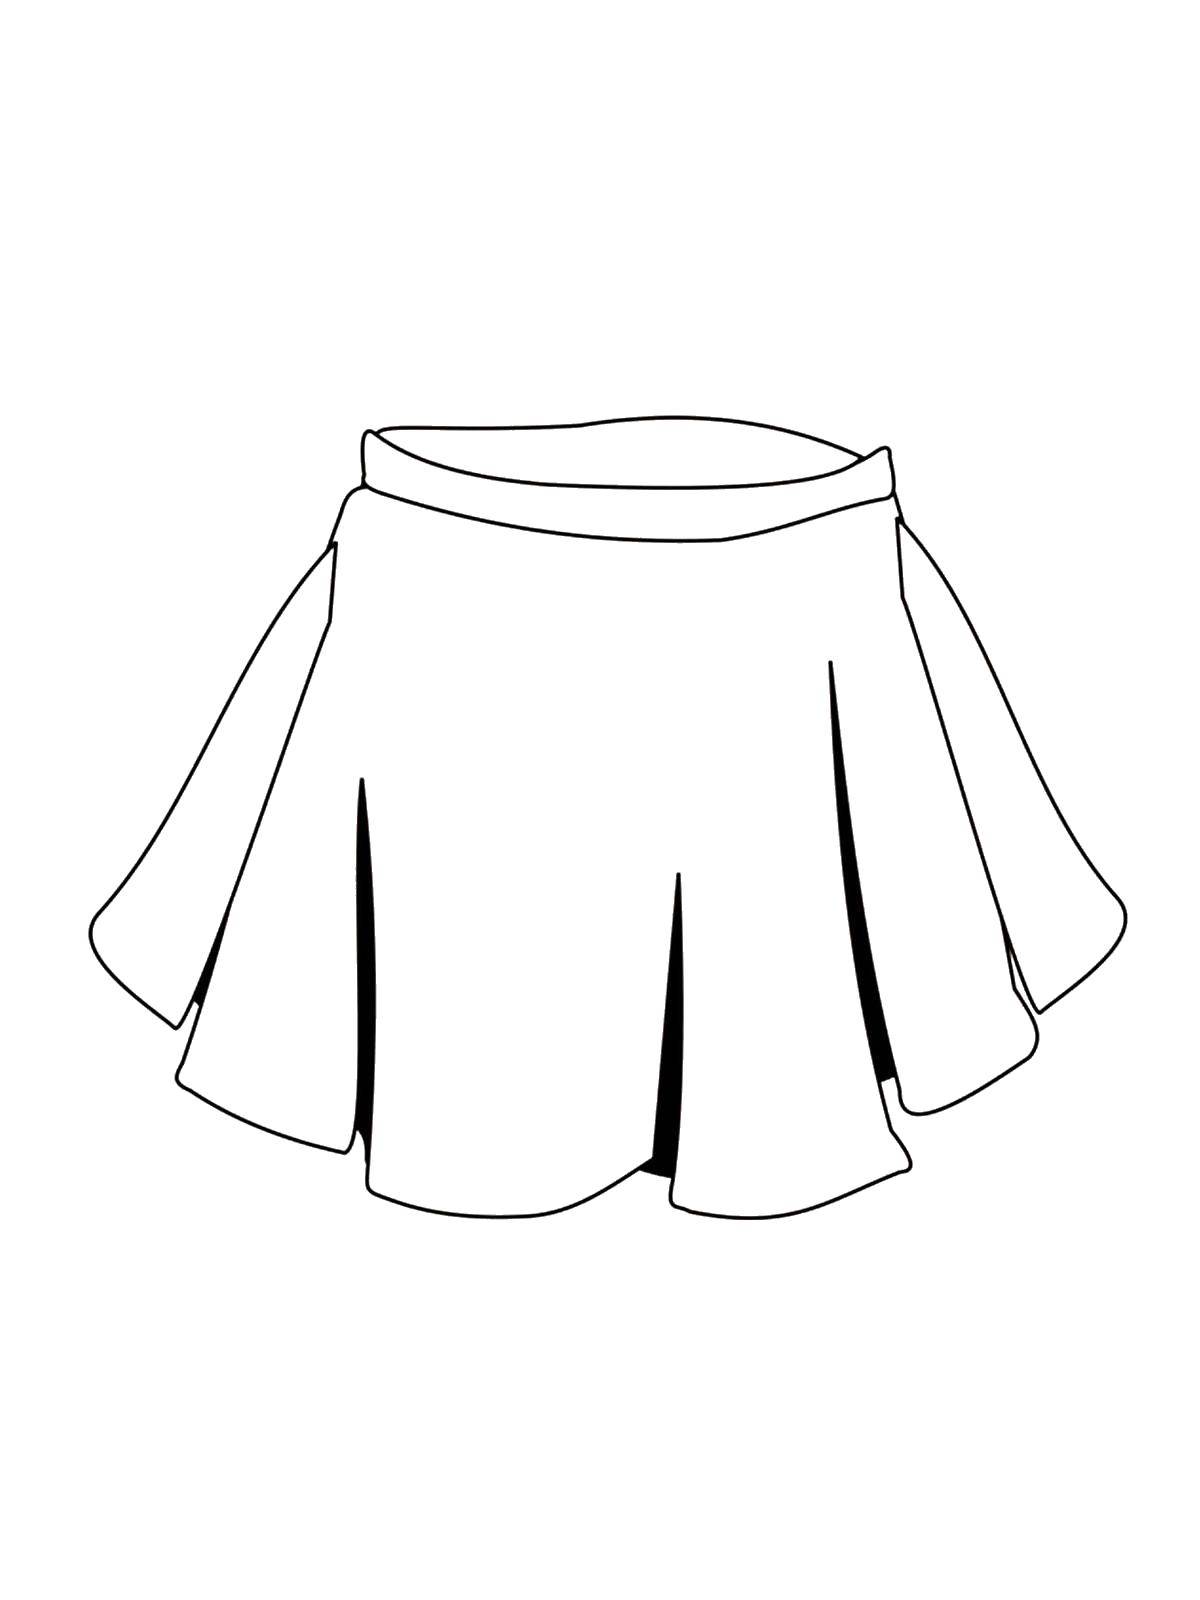 Coloring Skirt. Category clothing. Tags:  Clothing, skirt.